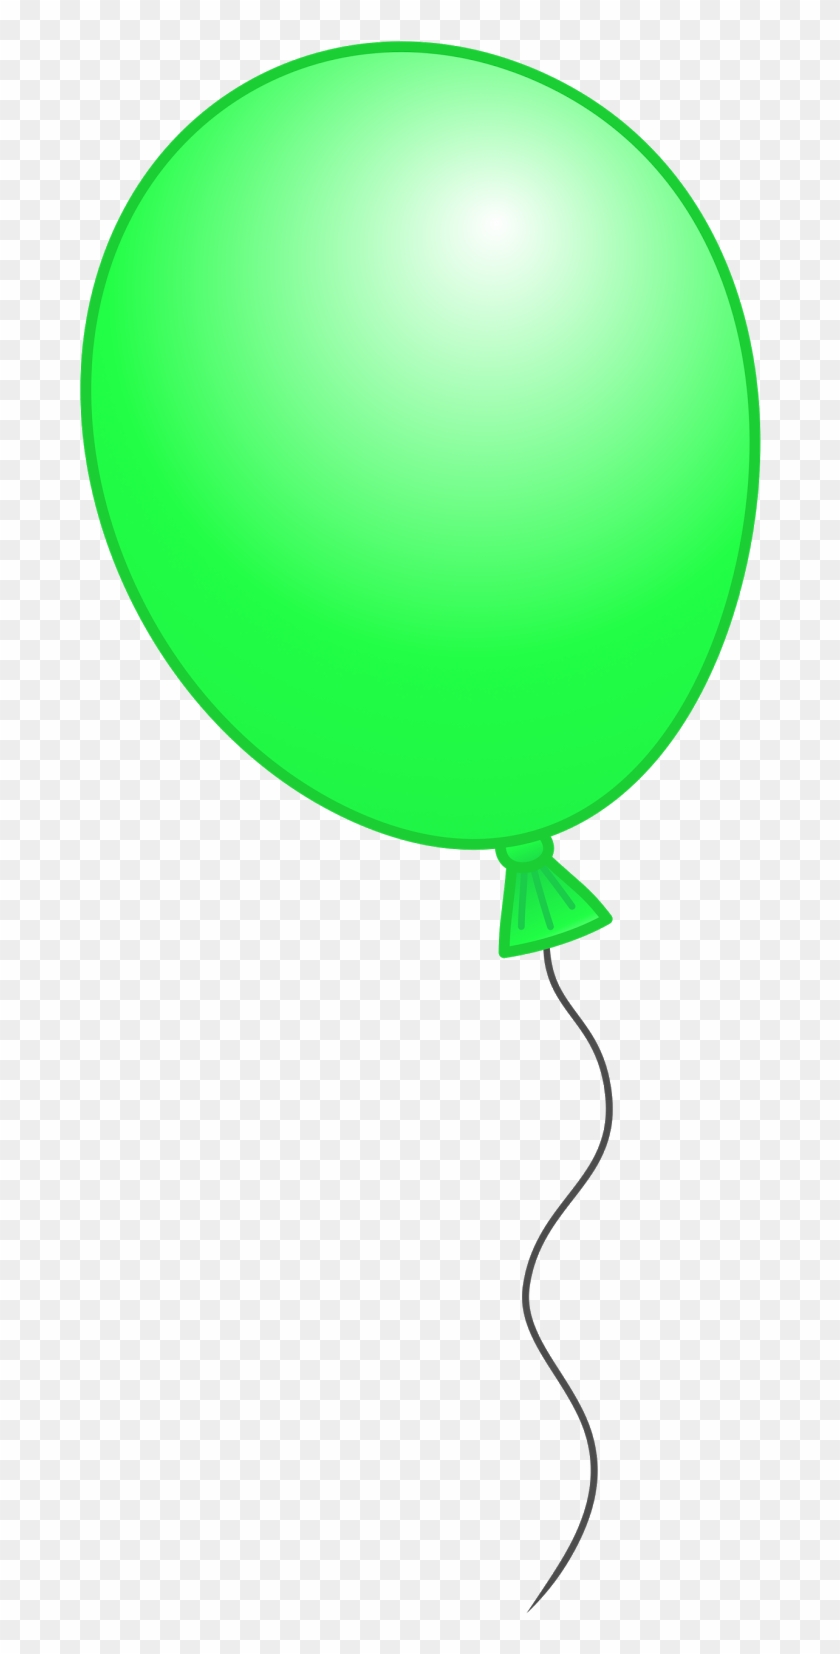 A Selection Of Balloons To Use In Your Projects Or - Green Balloon With Black Background #246384